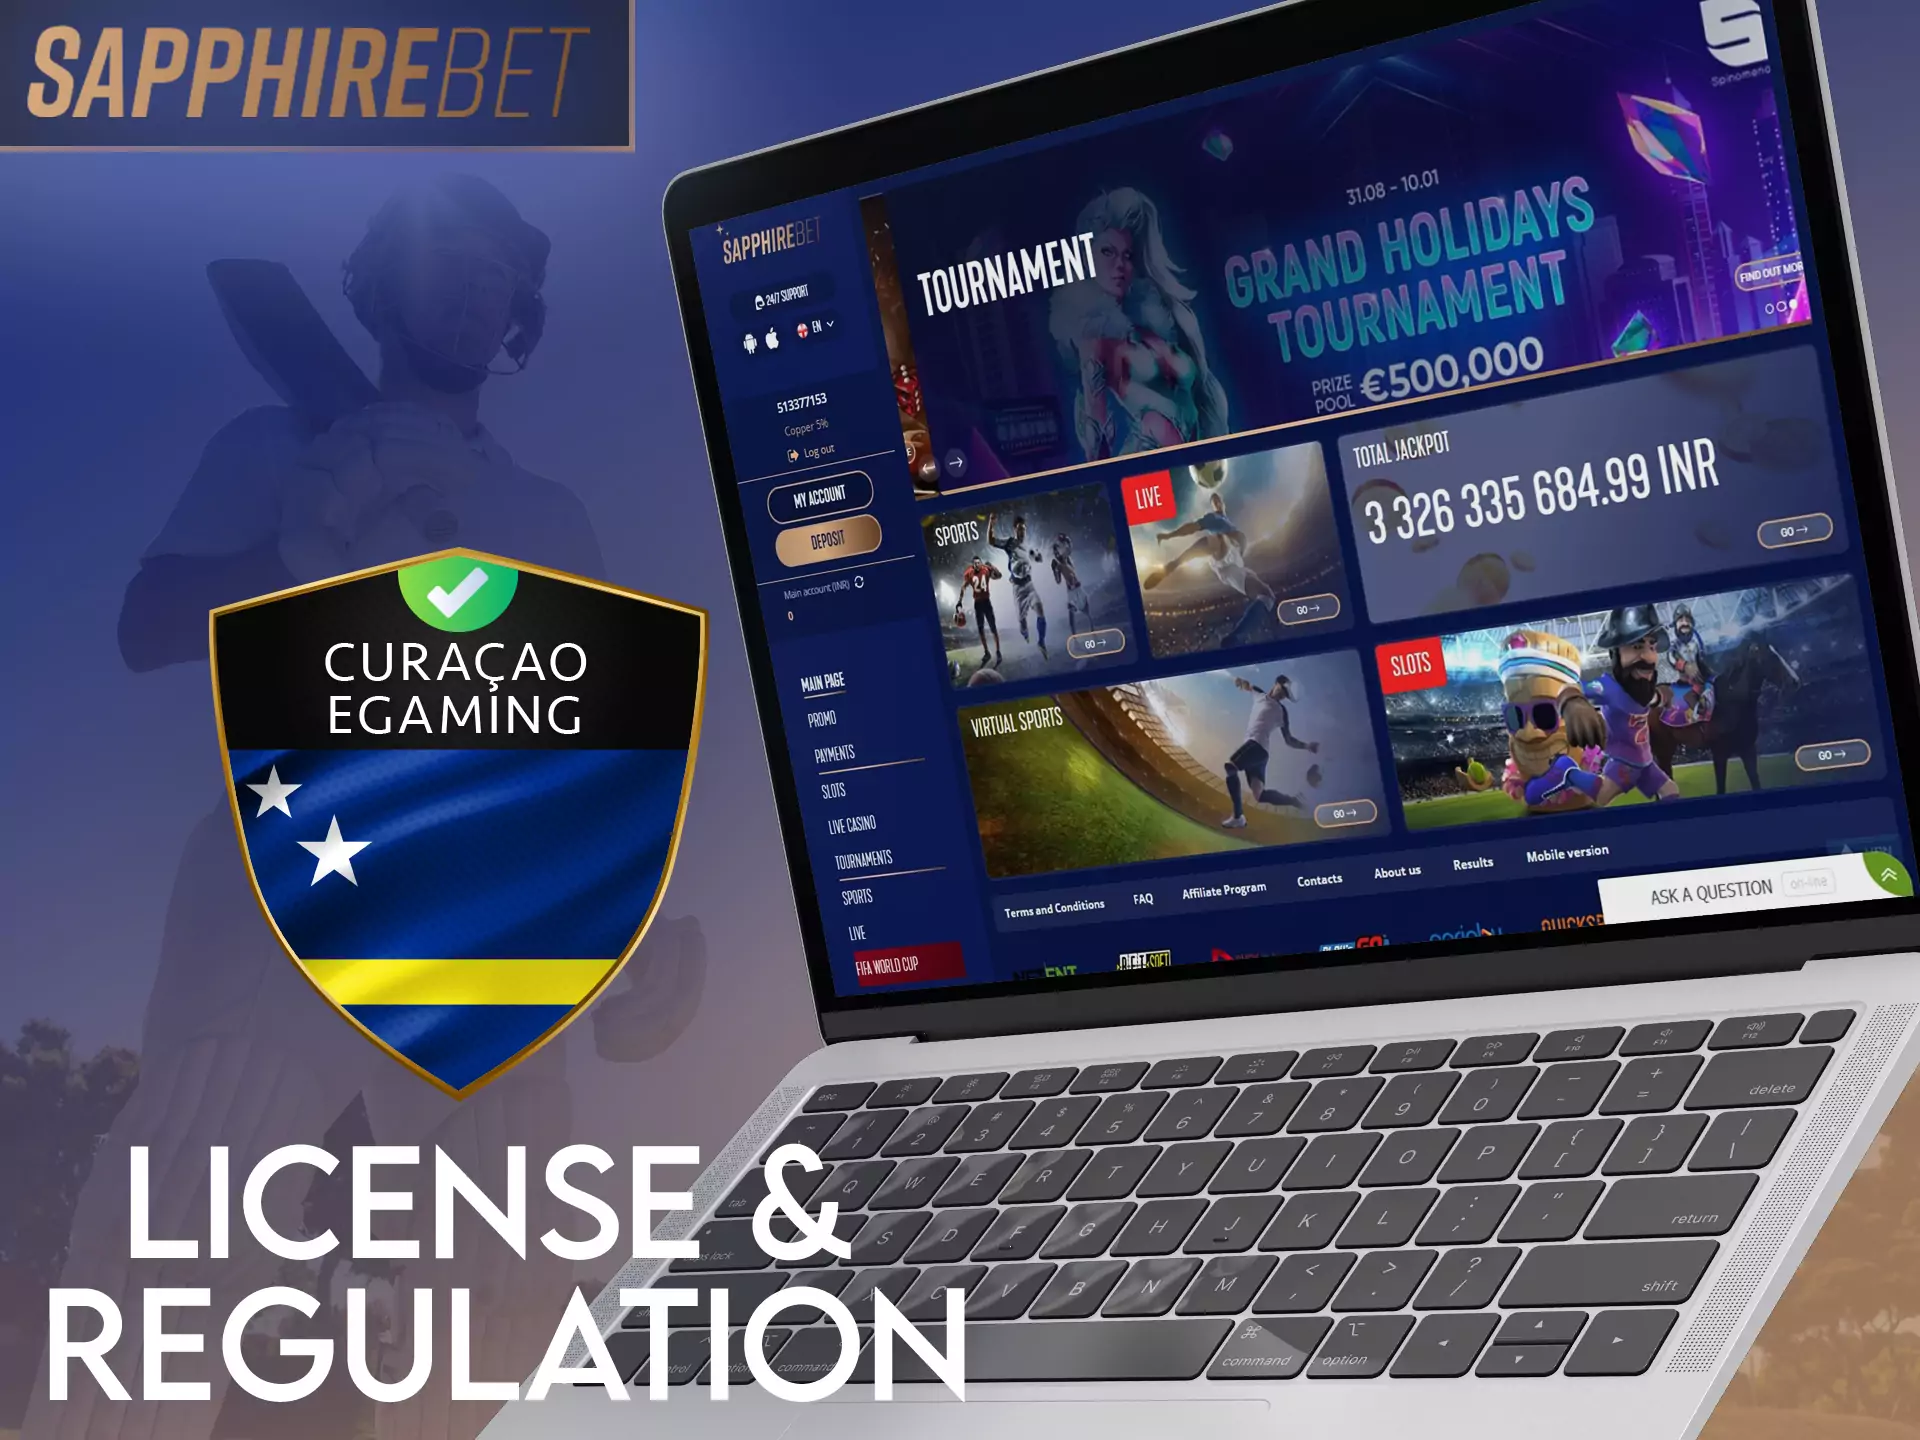 Sapphirebet has an official license and is absolutely legal and safe for players.